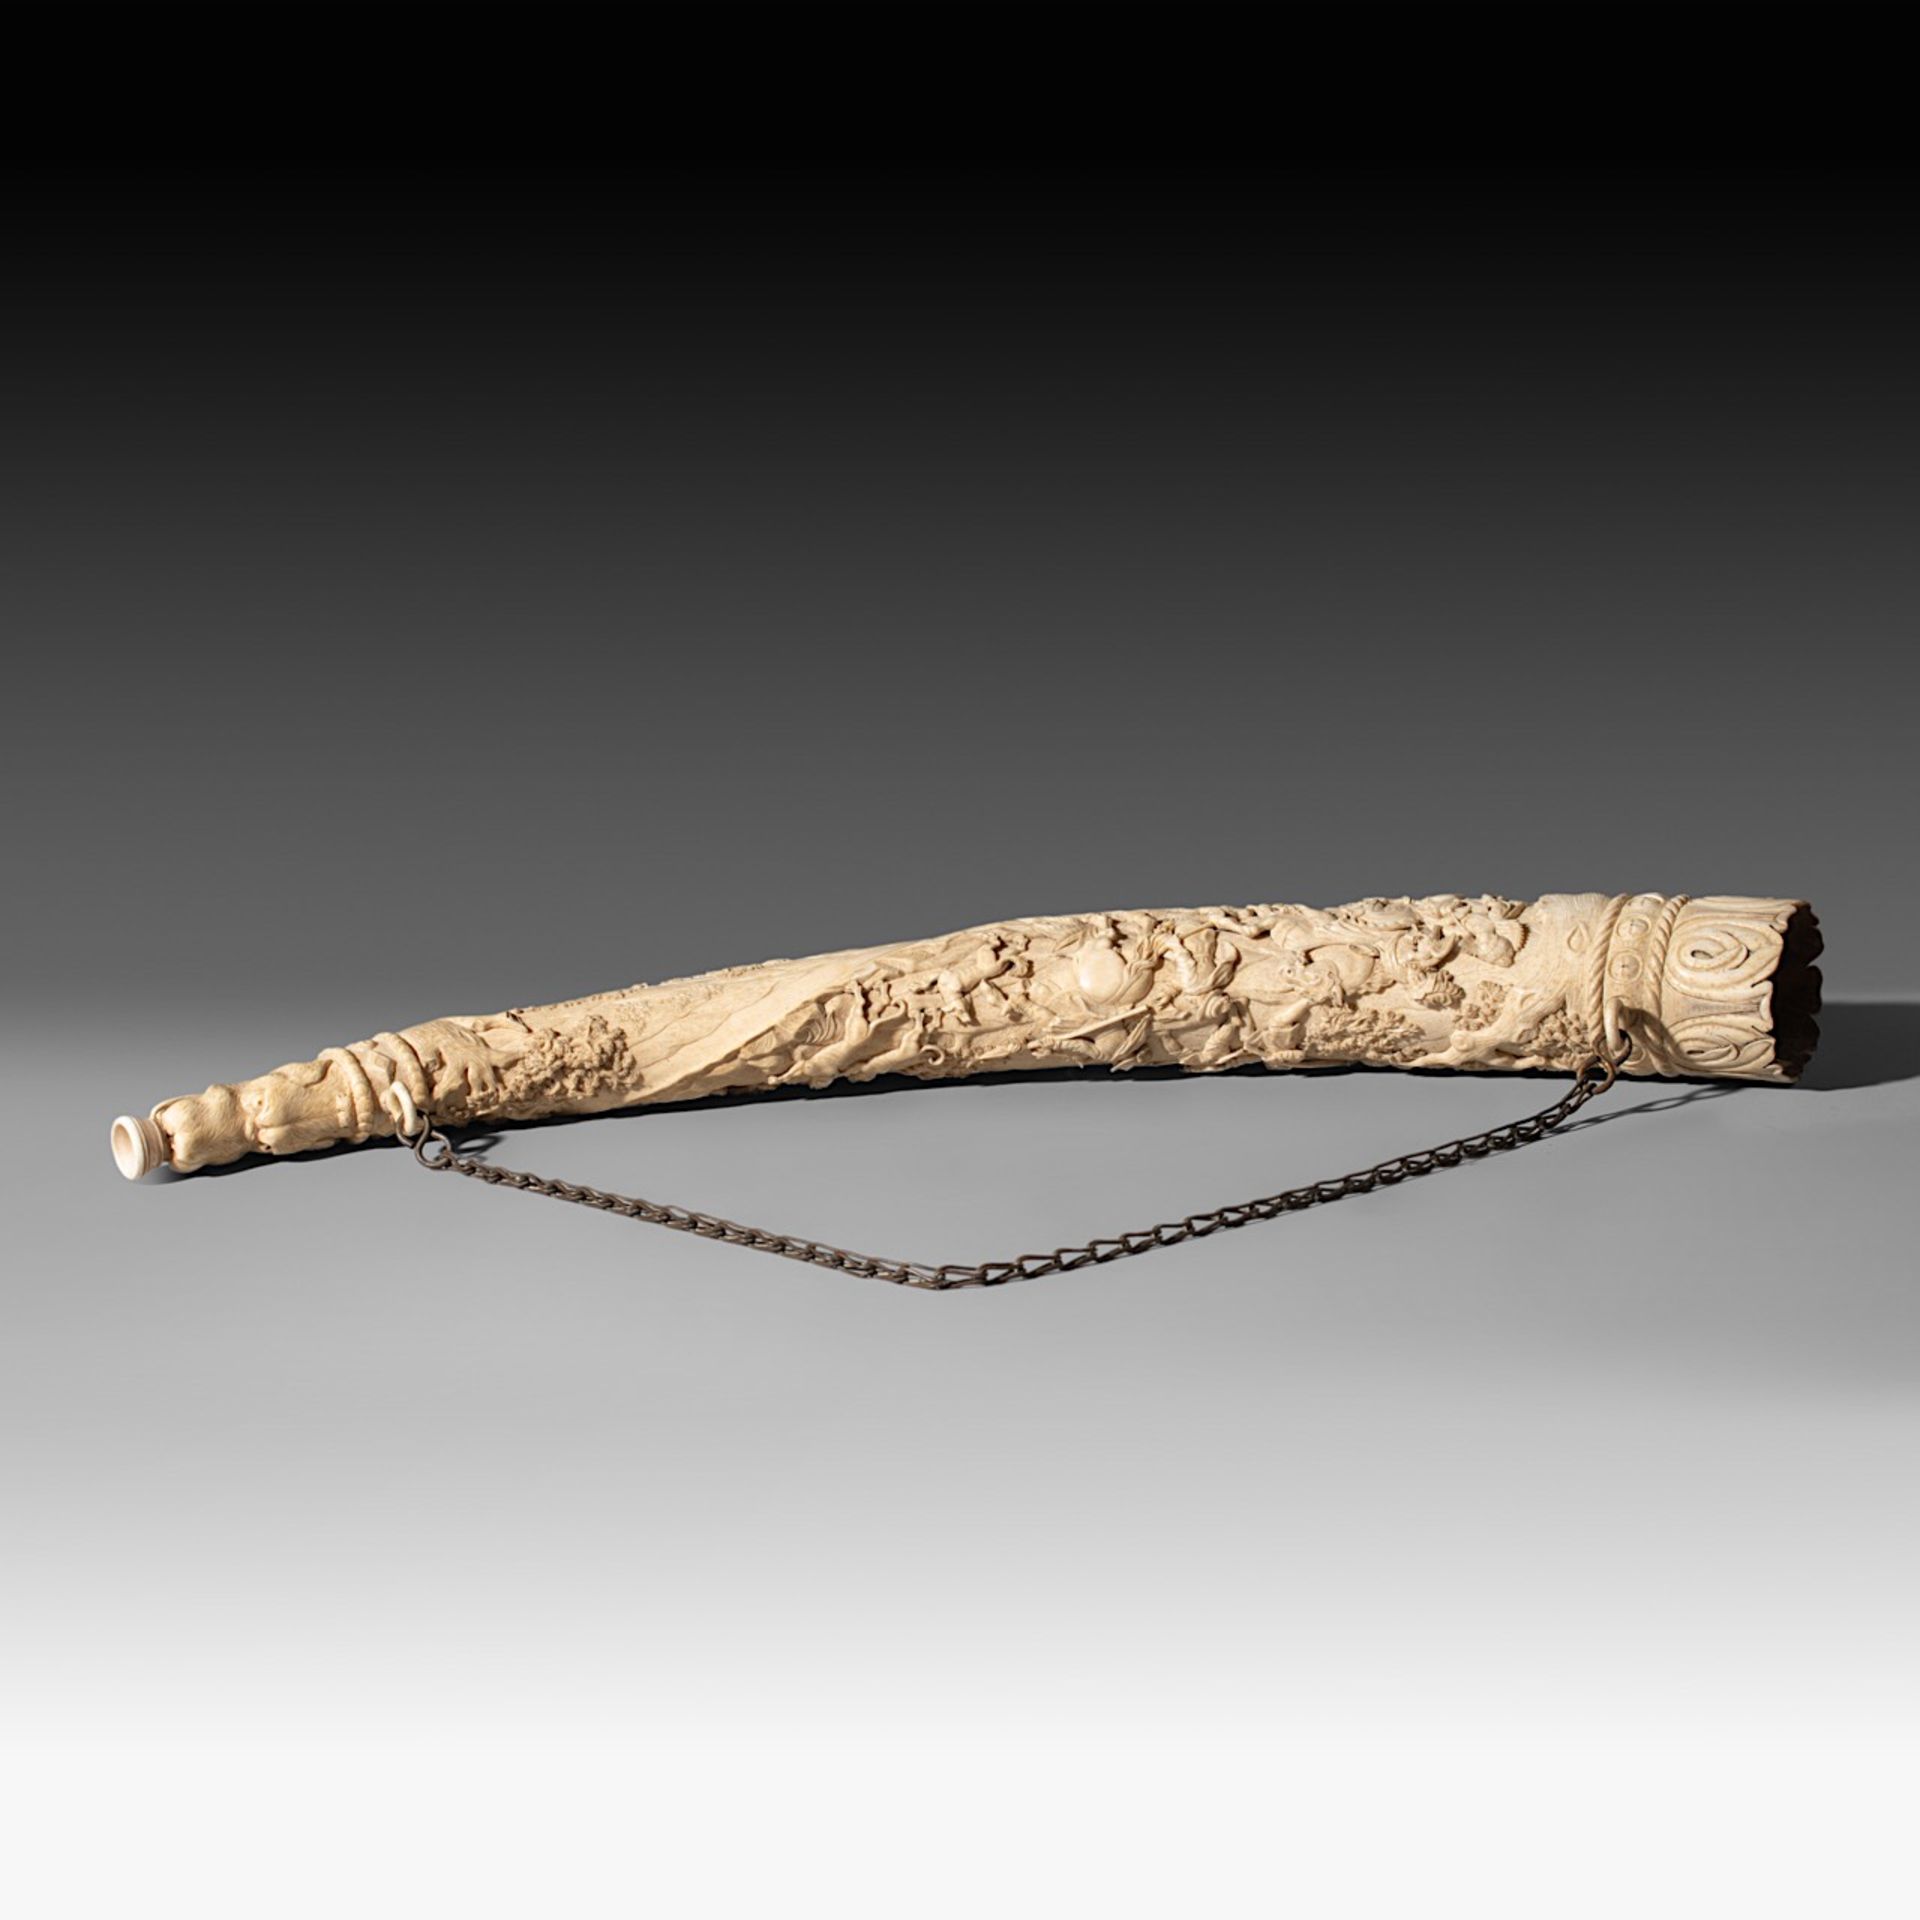 A 19th-century ivory hunting horn, last quarter 19th century, W 74,5 cm - 2850 g (+) - Image 6 of 11